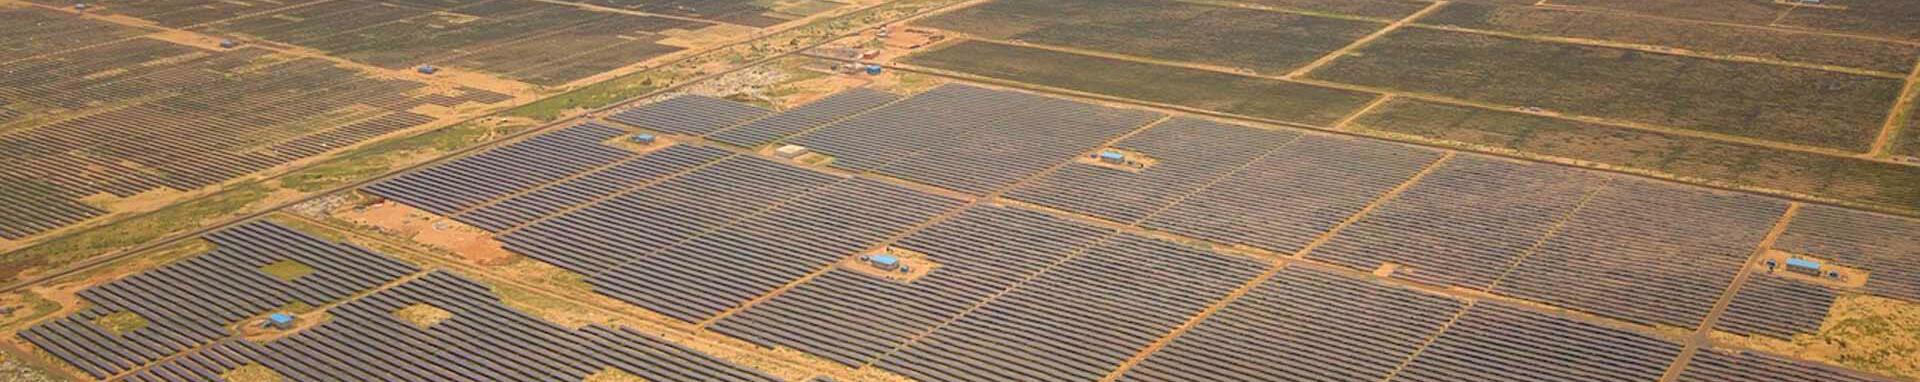 CIF Action Bhadla Solar Park in Rajasthan, India. The Bhadla Solar Park is one of the largest solar parks in India, spanning across 10,000 acres. Copyright CIF 2018